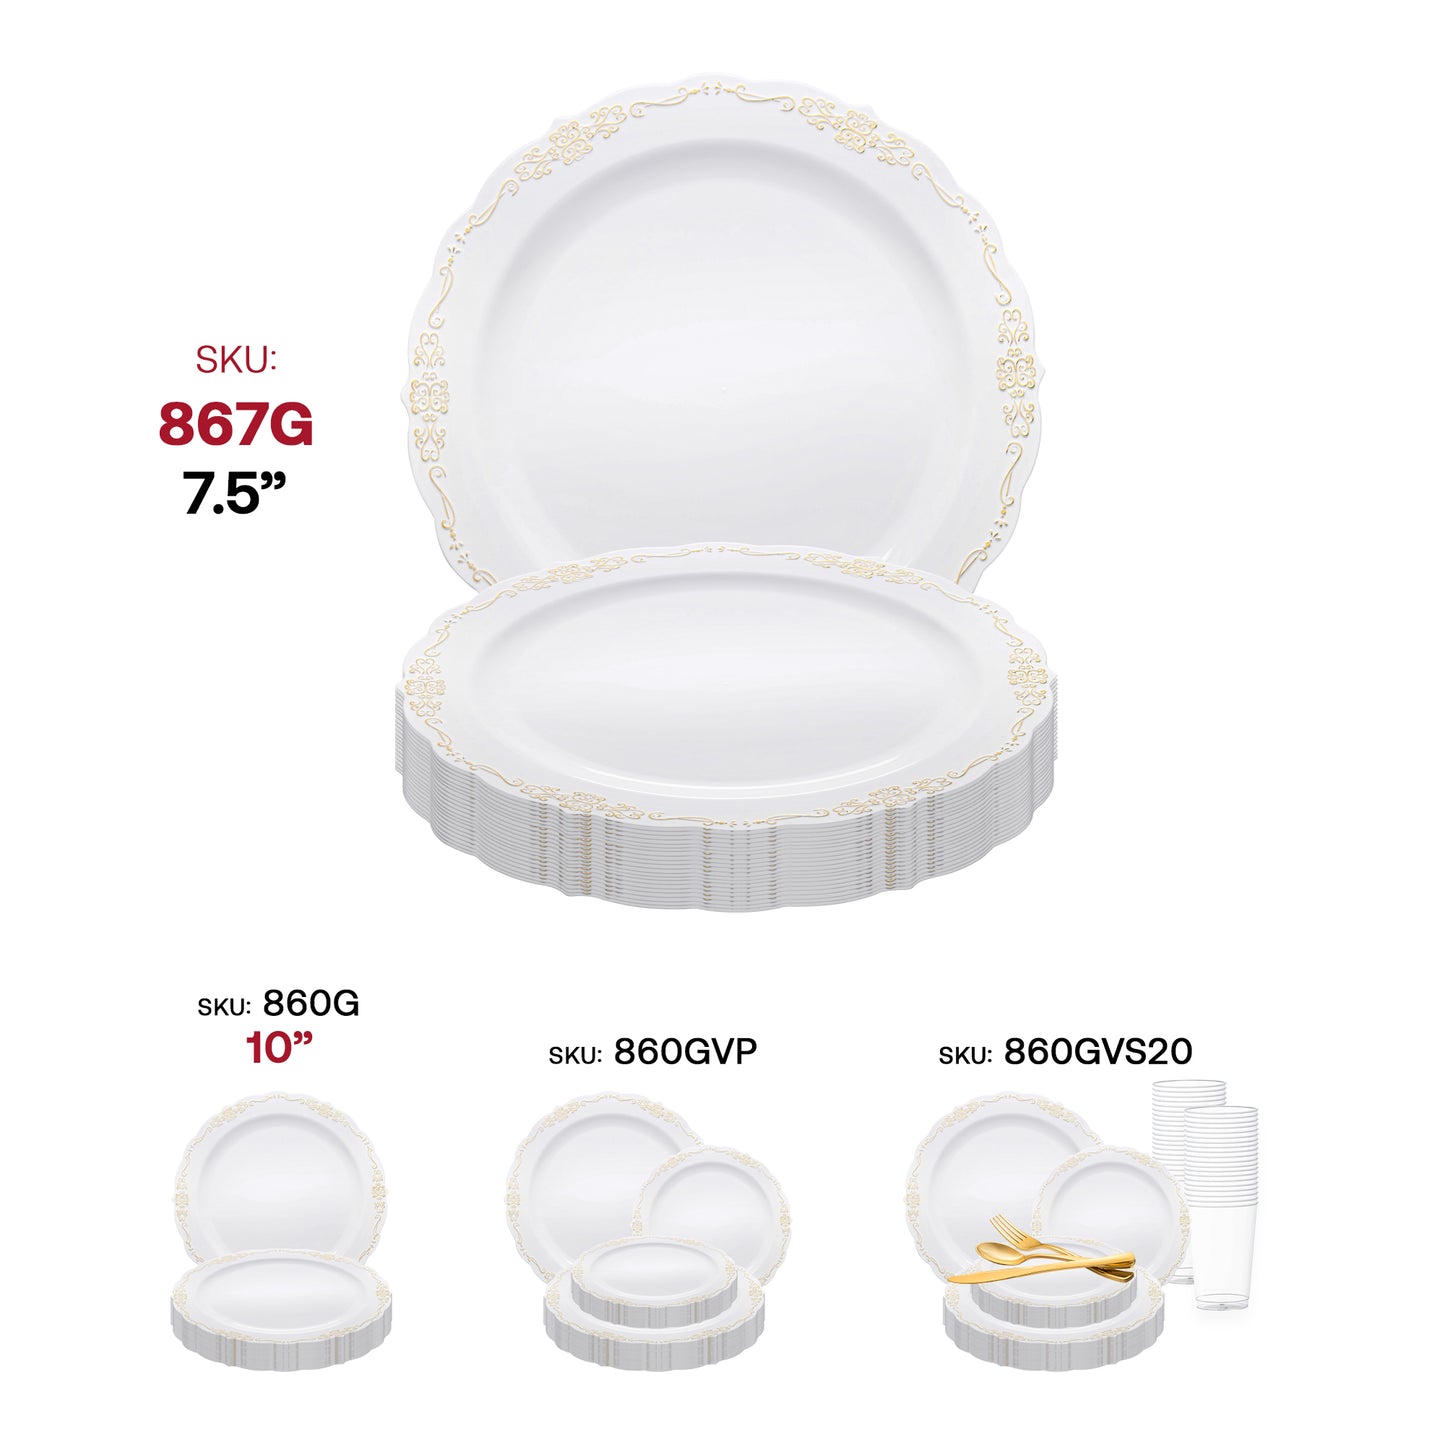 White with Gold Vintage Rim Round Disposable Plastic Appetizer/Salad Plates (7.5") SKU | The Kaya Collection